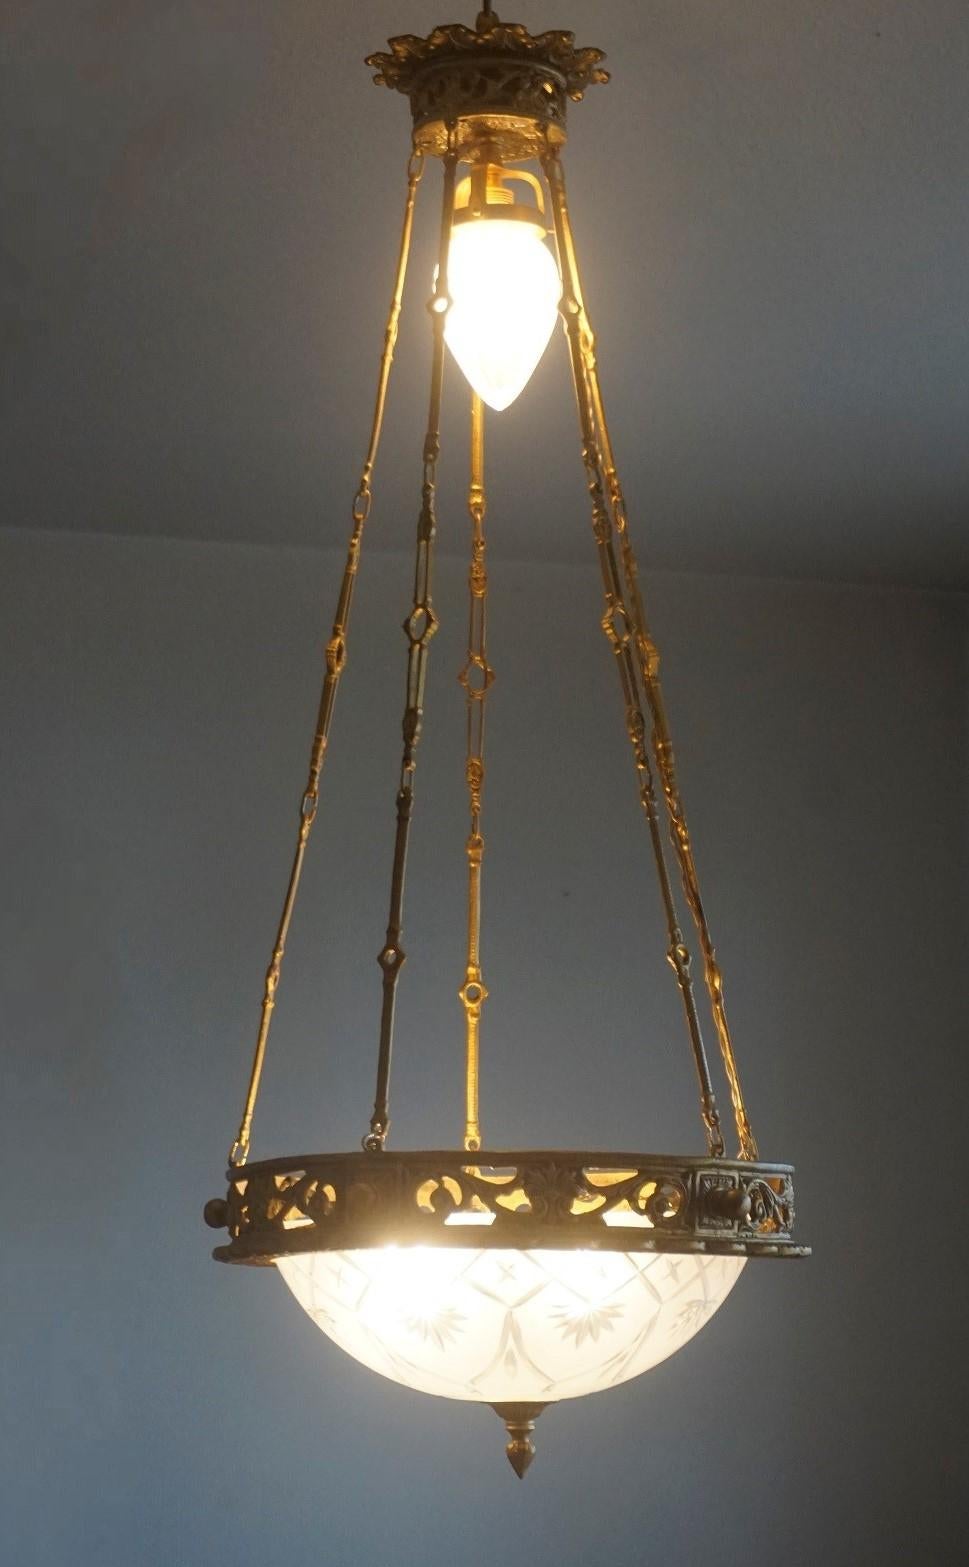 French Art Deco Gilt Bronze Cut Glass Chandelier, Early 20th Century For Sale 4